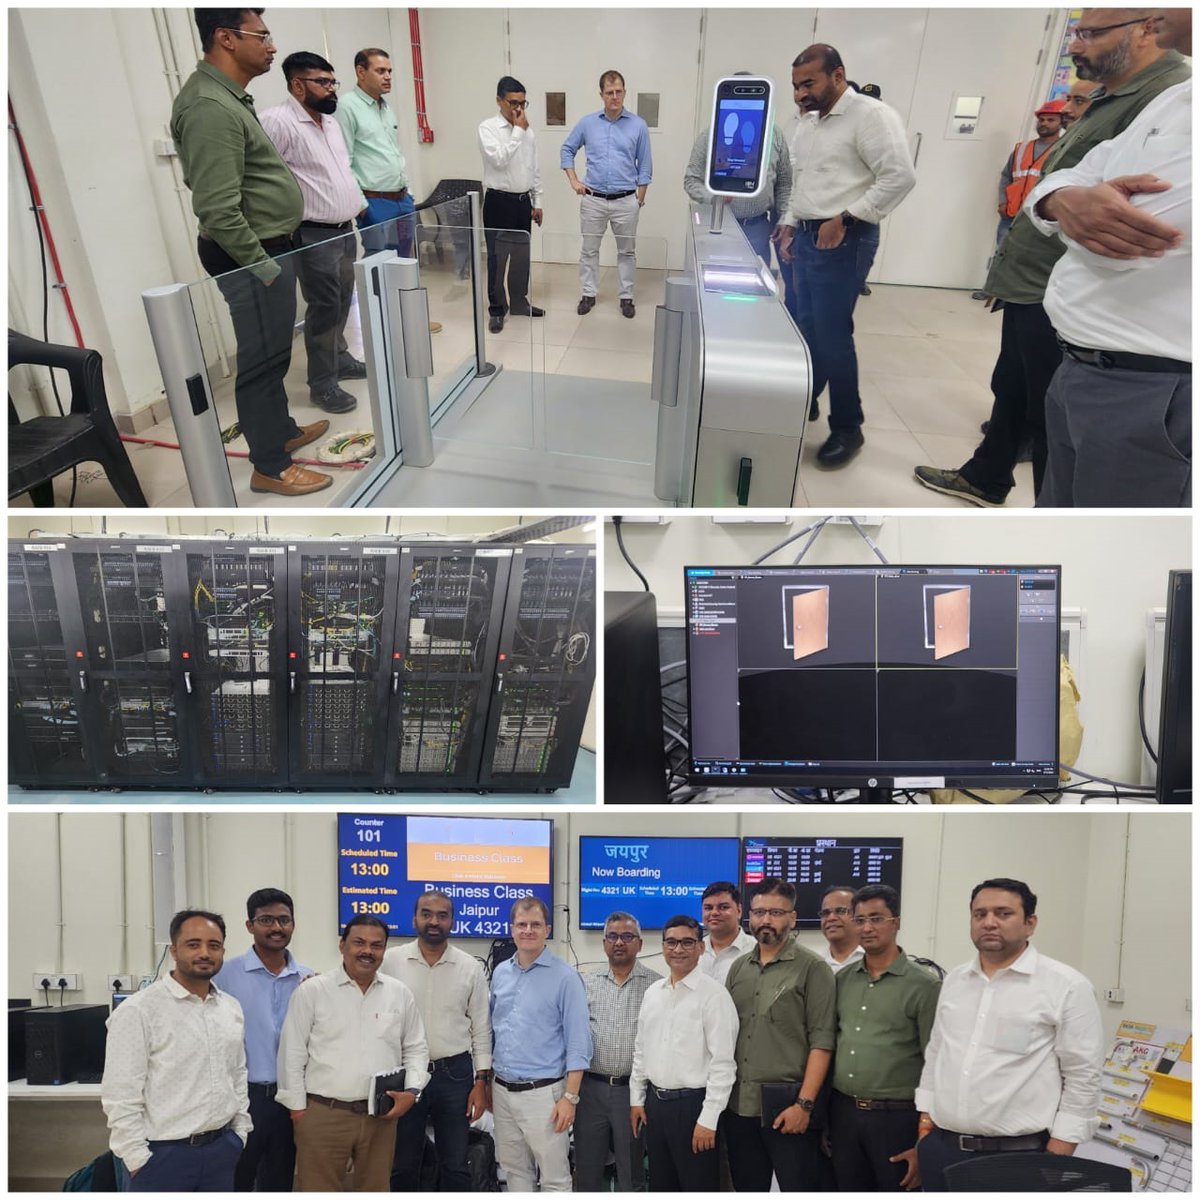 Behind the scenes at #NIAirport Integrated Testing Facility! We're rigorously testing prototypes of e-gates for quick check-in and boarding with #DigiYatra, advanced surveillance systems, FIDS, PIDS, BMS and more to ensure a seamless and secure travel experience. #FromTheGroundUp